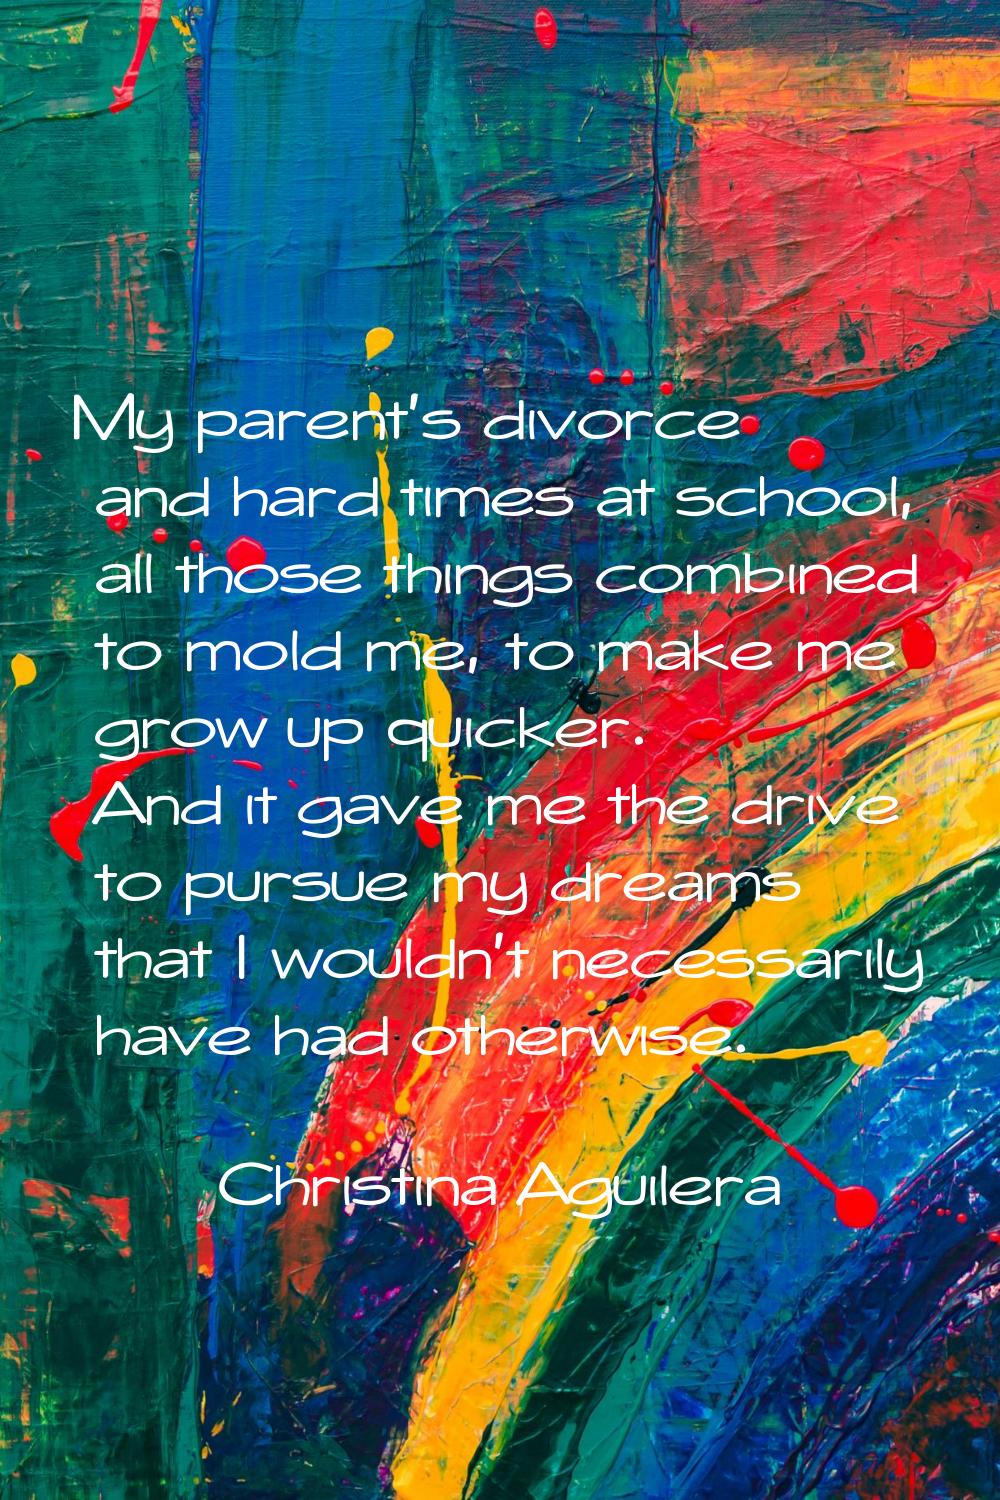 My parent's divorce and hard times at school, all those things combined to mold me, to make me grow